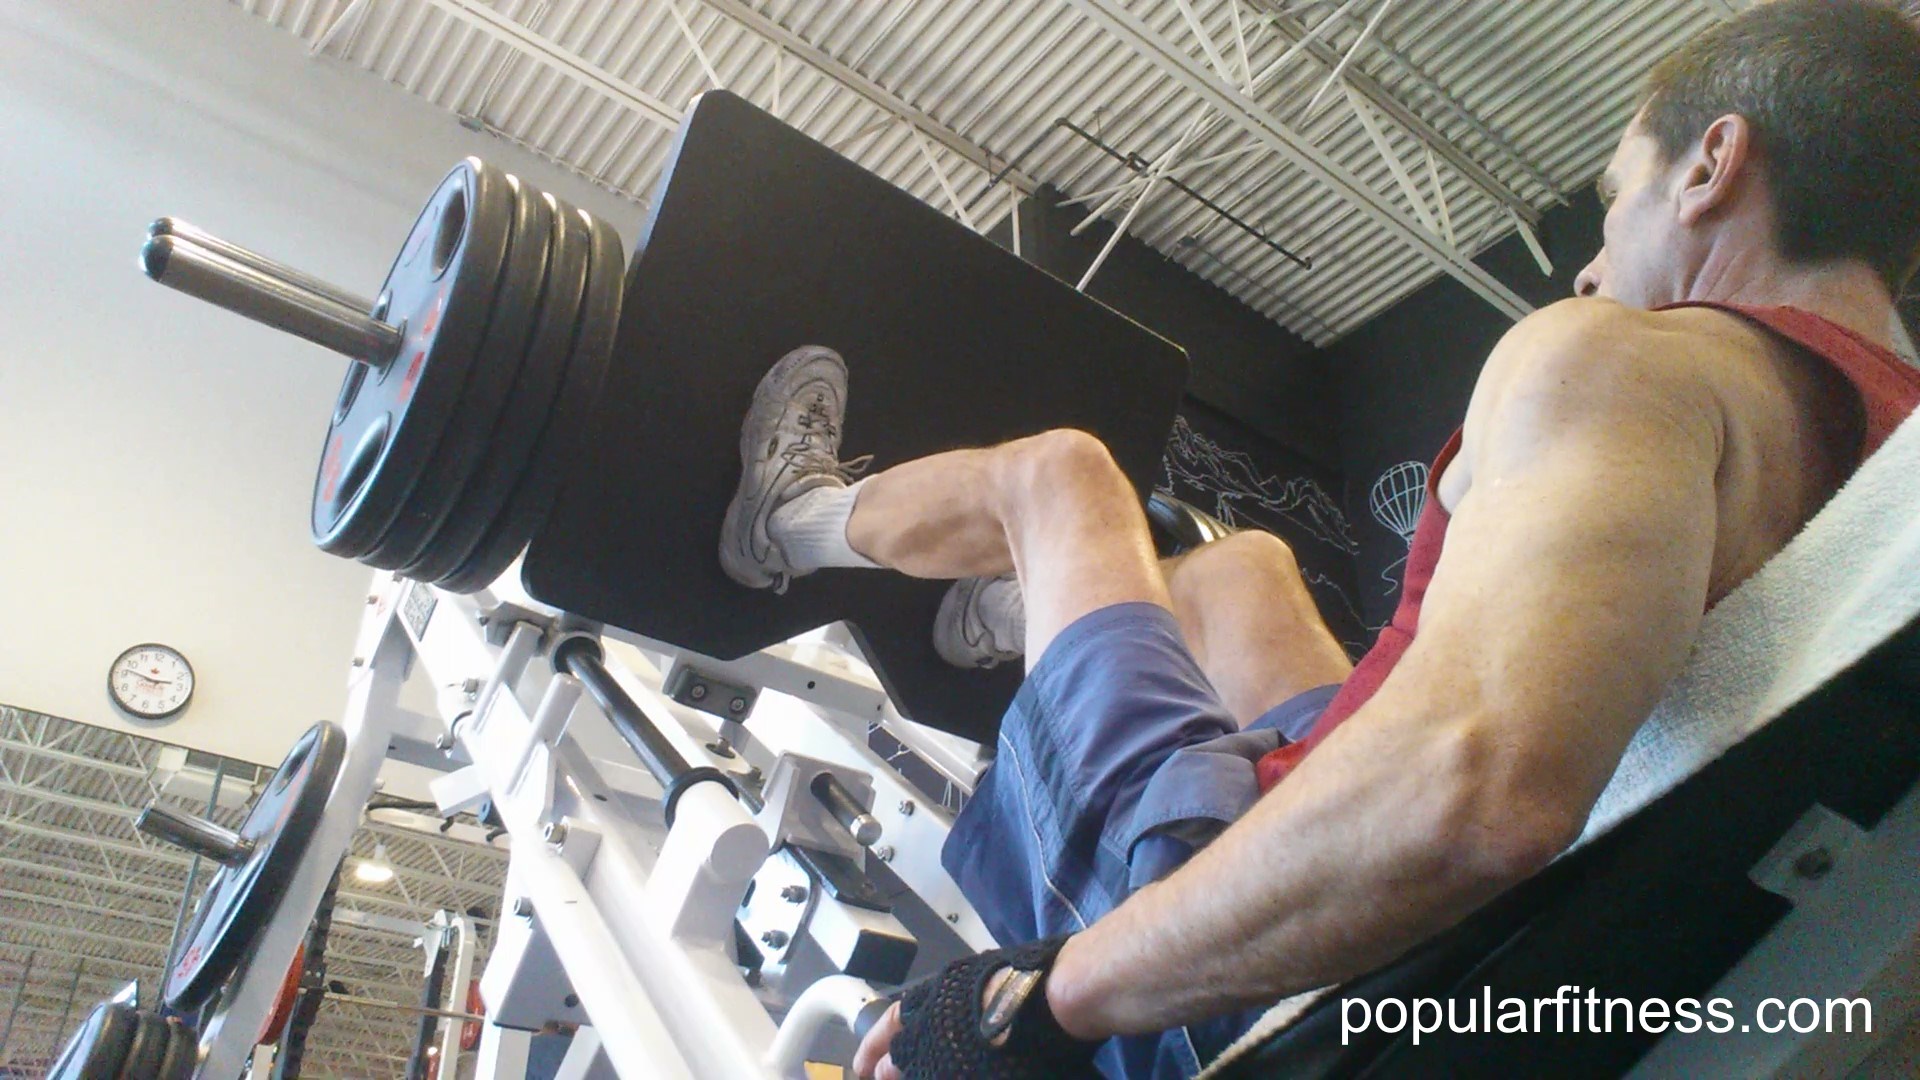 Seated leg press exercise using the Hammer Strength machine - photo by Popular Fitness